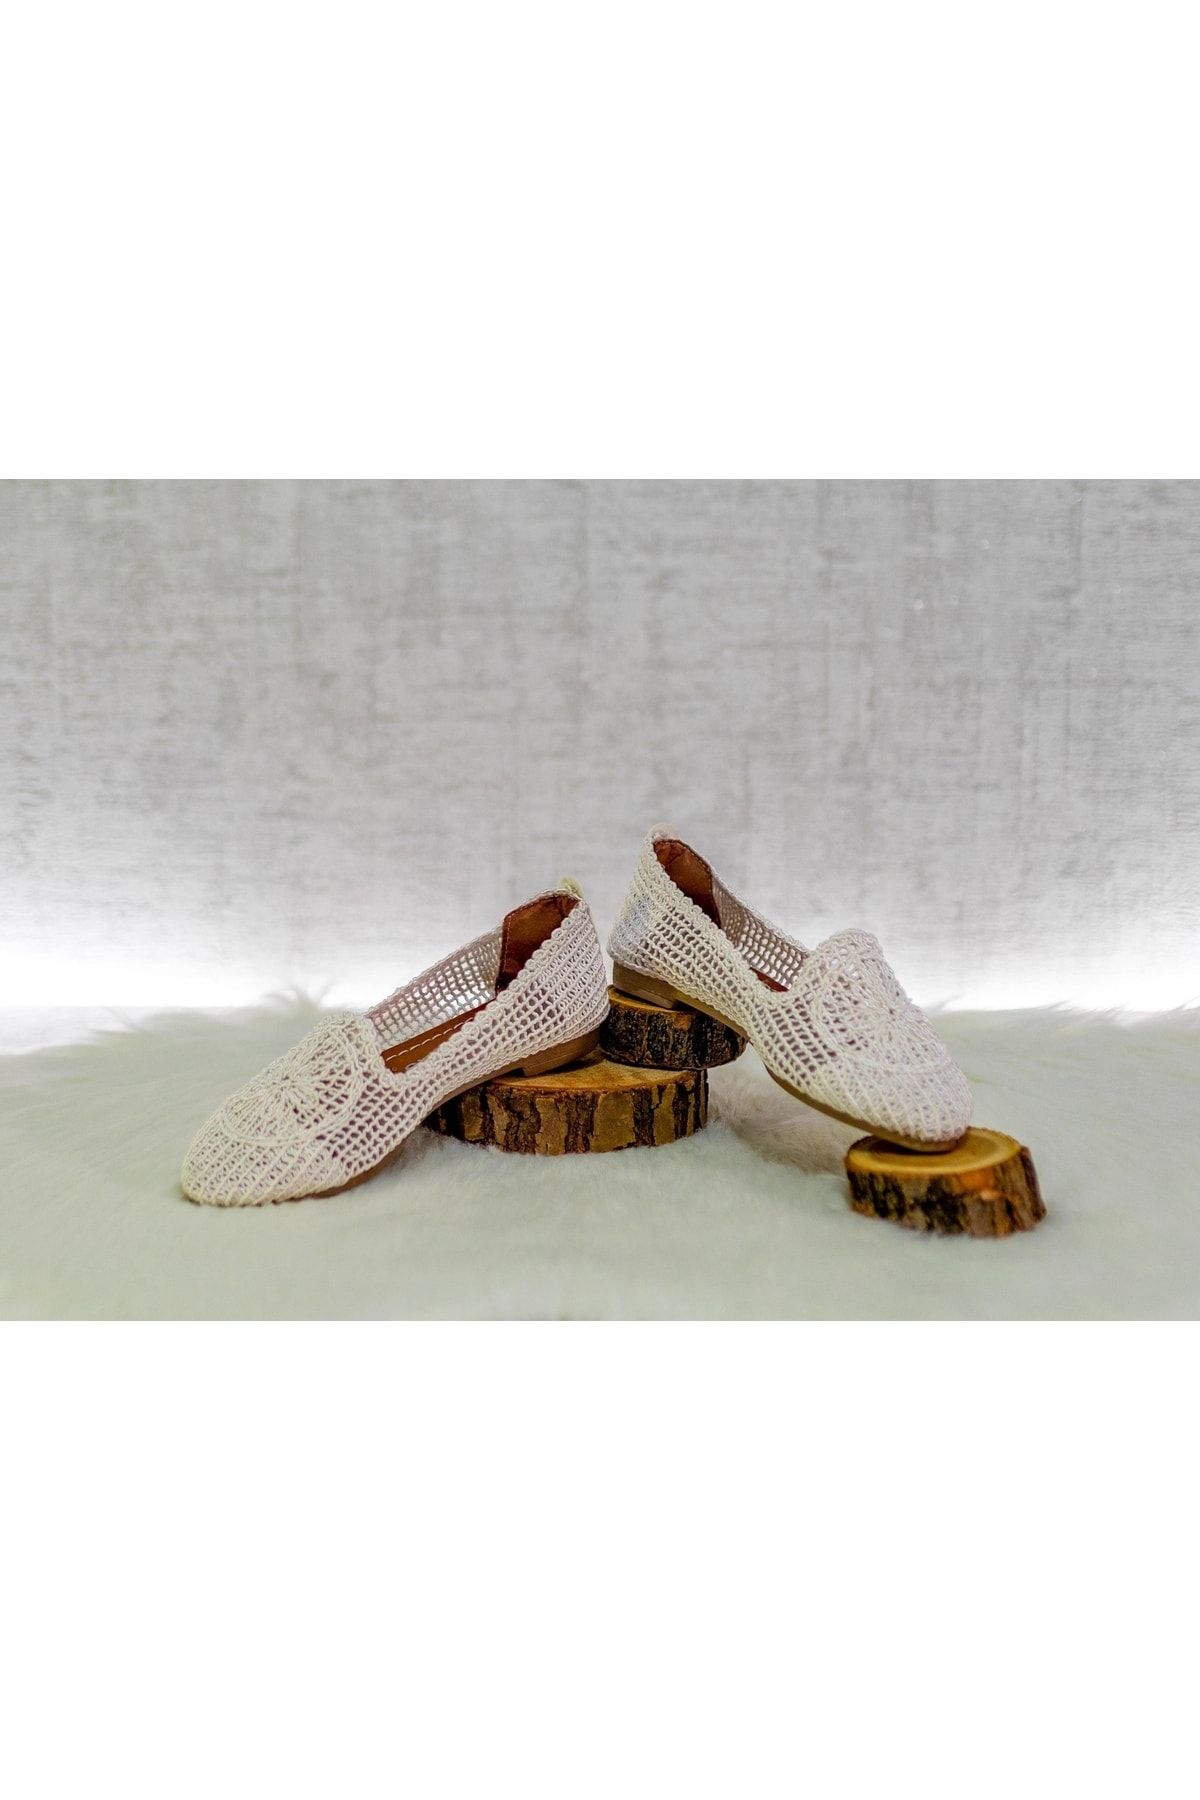 NB - Luxury Slippers Sandals Loafers - LU-V - 1047 in 2023